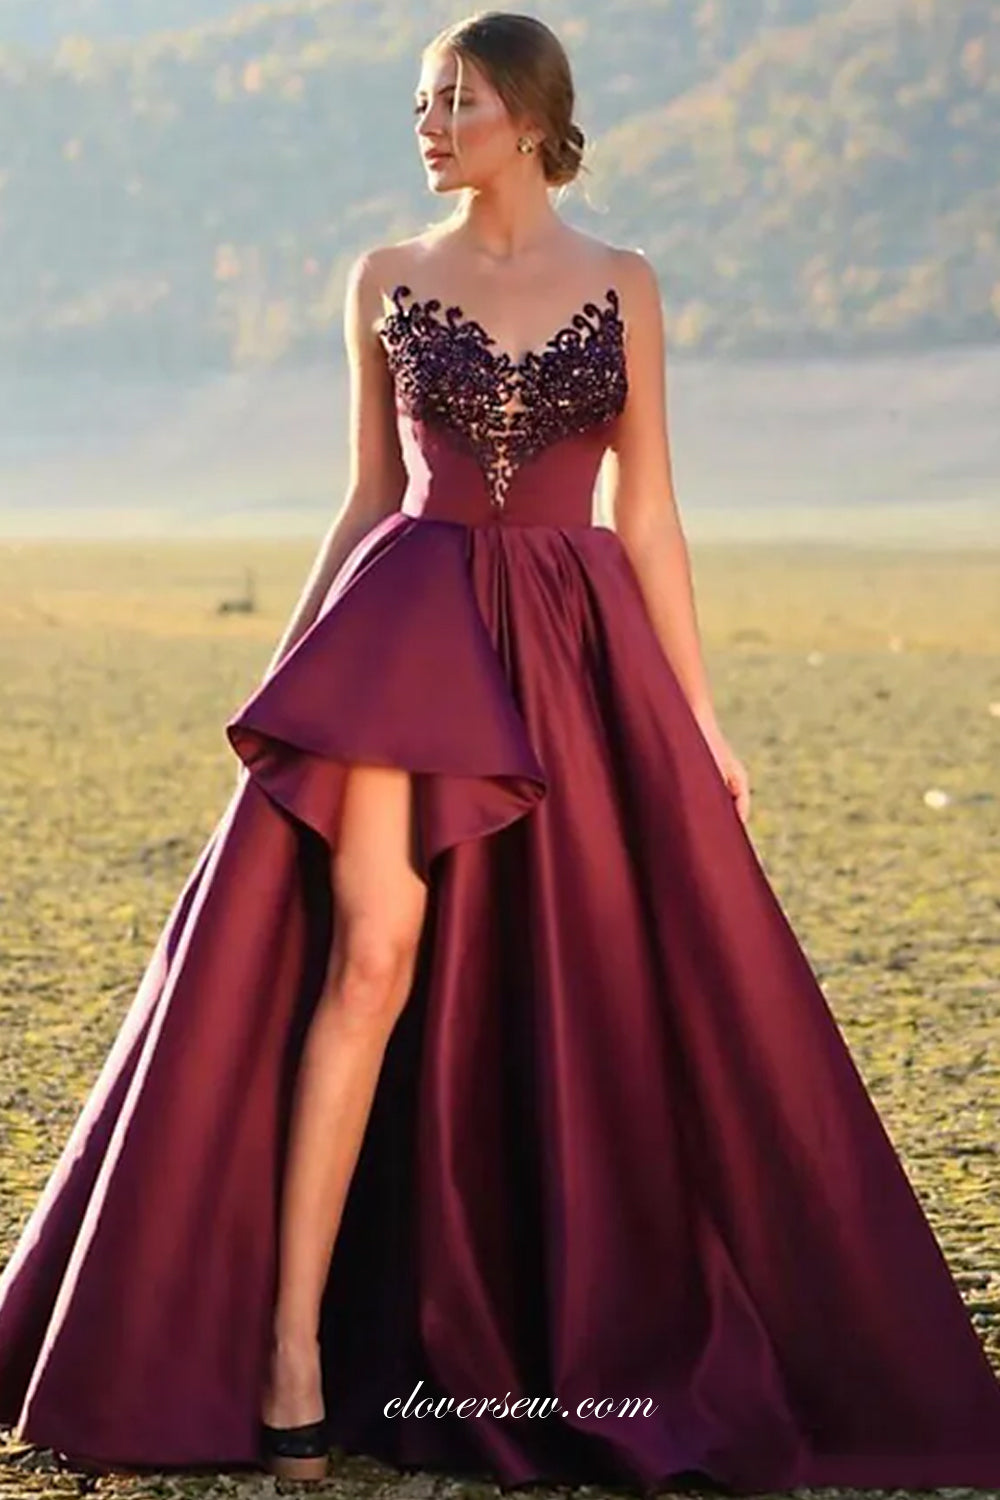 Maroon Strapless Beaded Applique A-line Formal Dresses ,CP0724